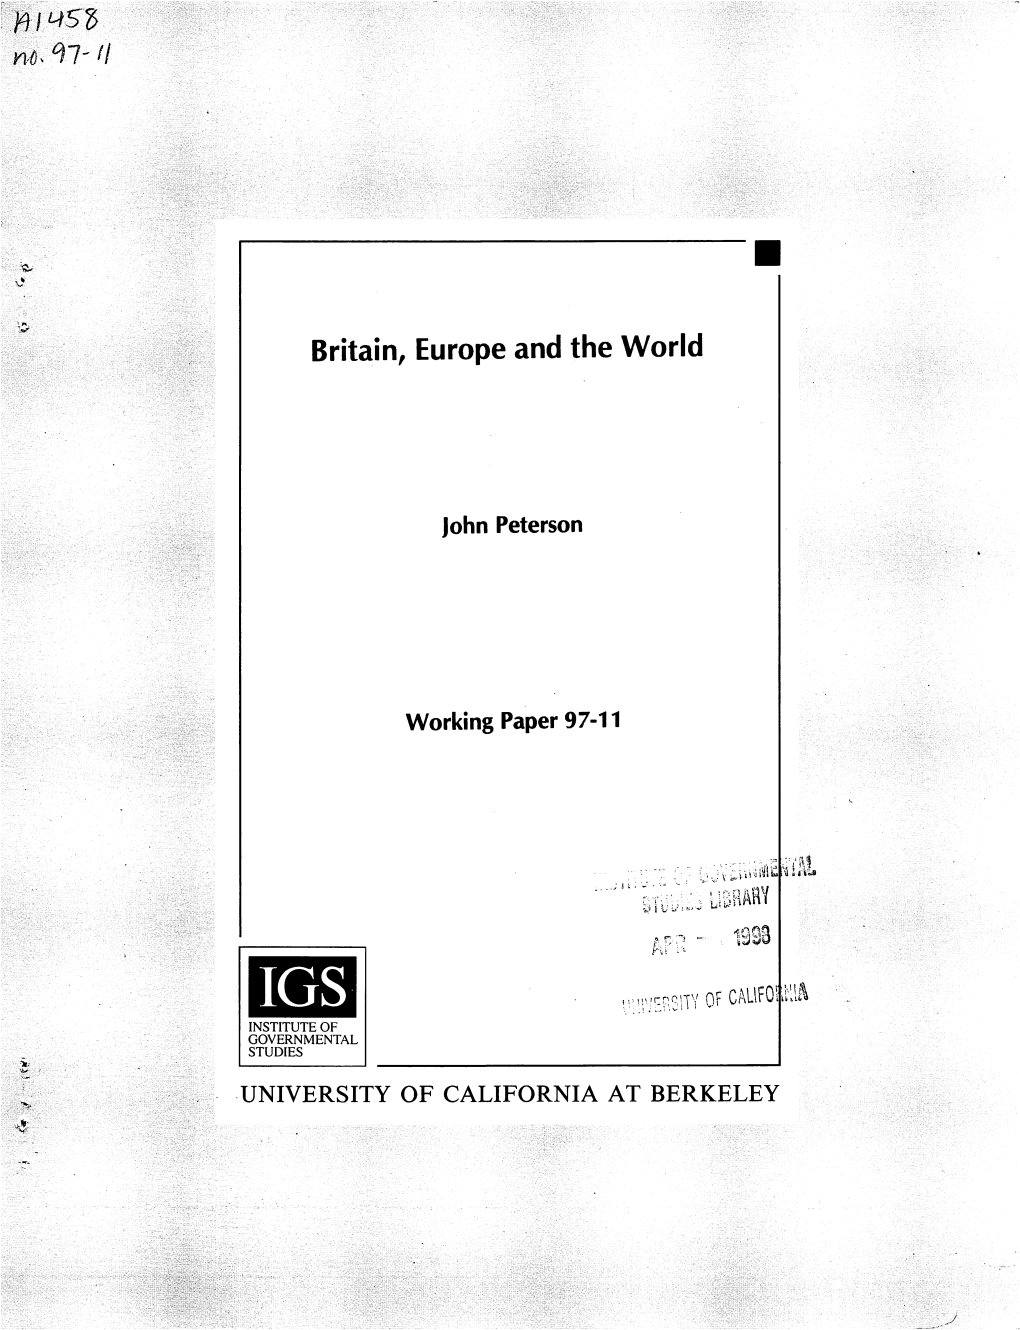 Britain, Europe and the World